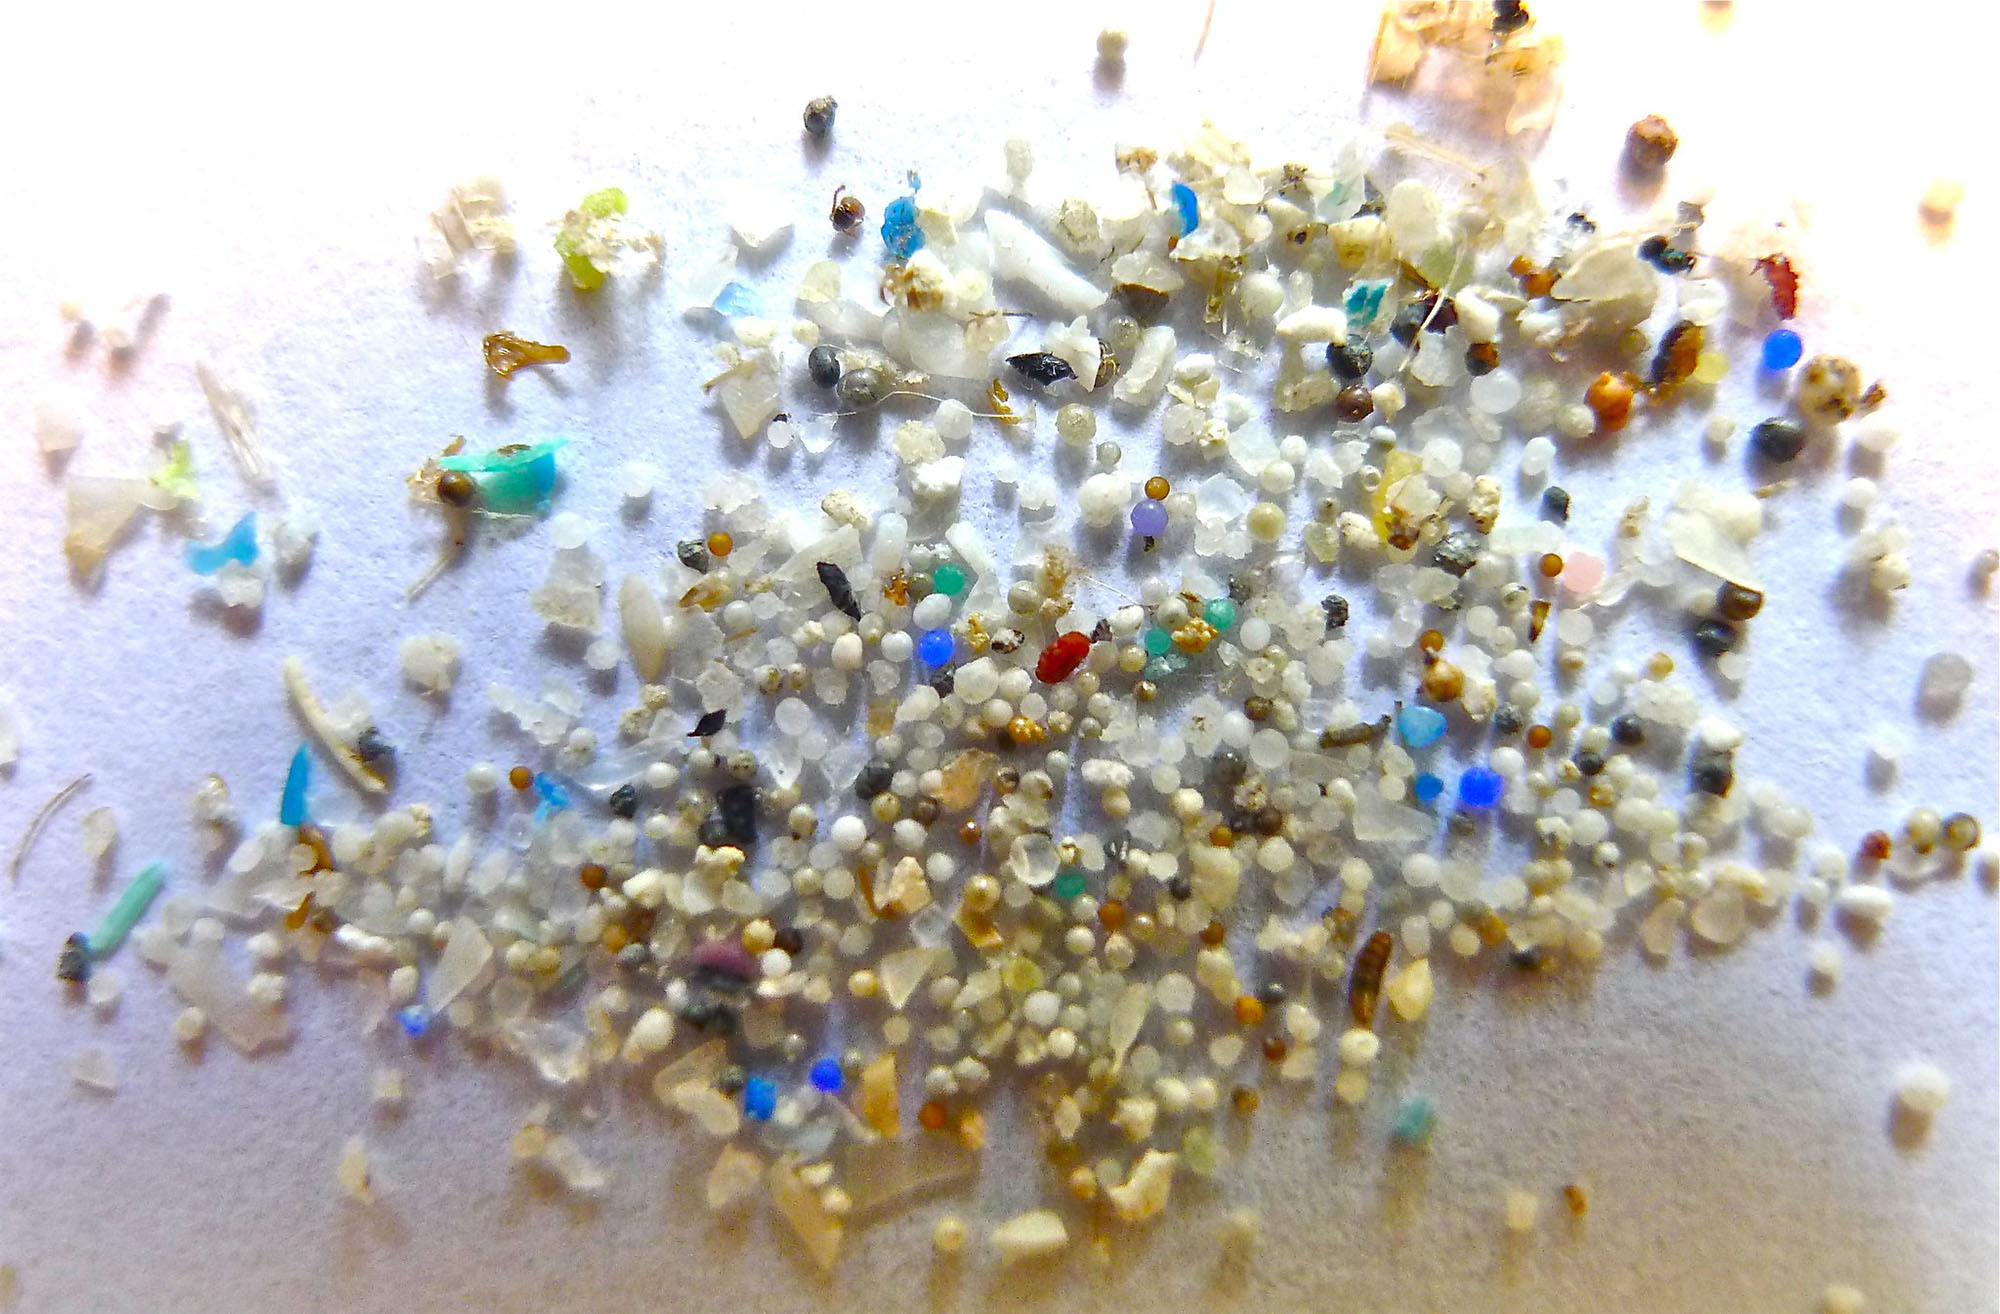 Photo of microplastic pieces.